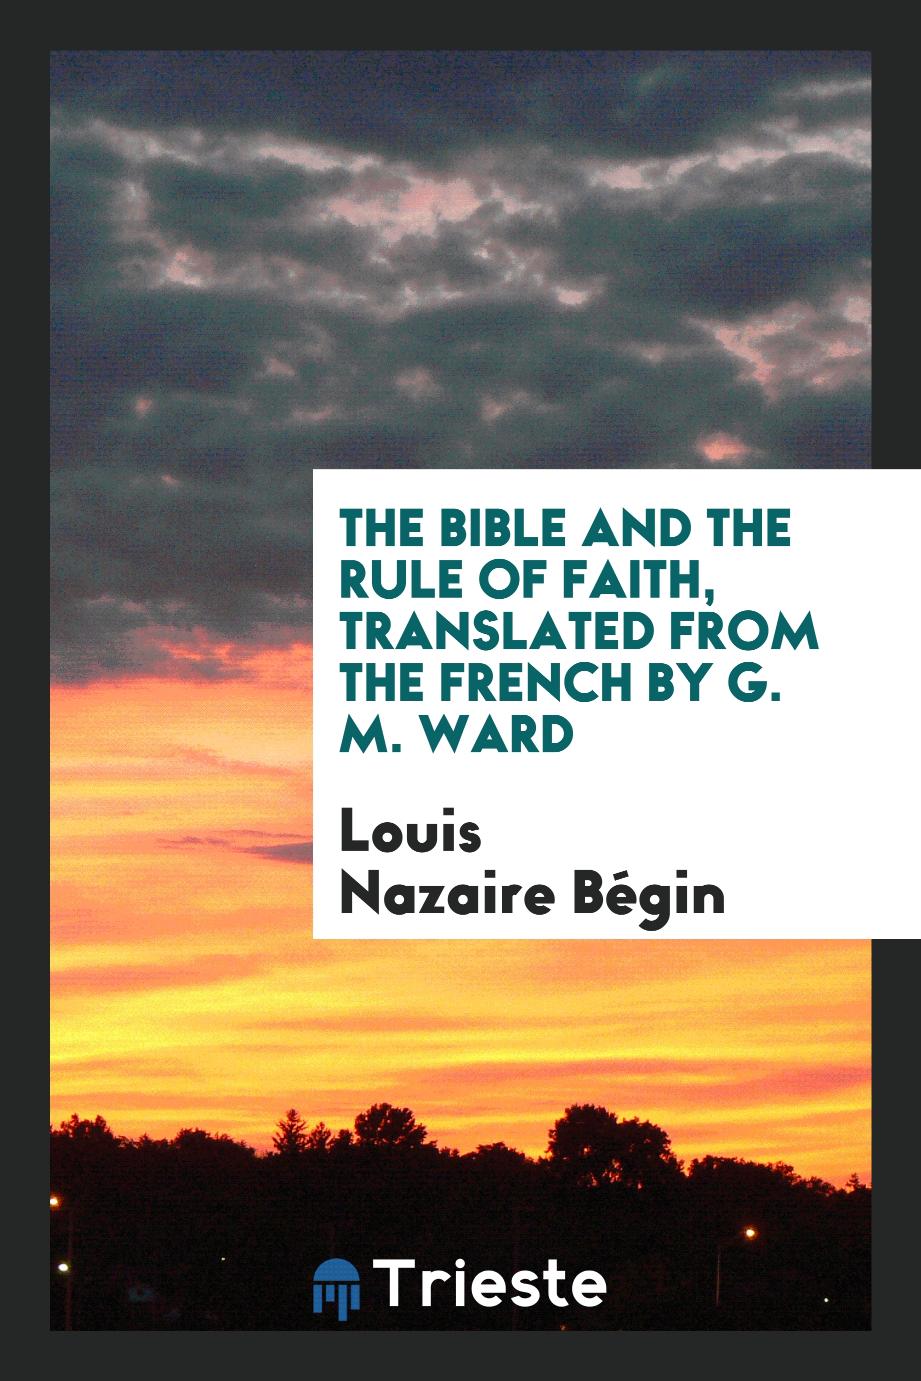 The Bible and the Rule of Faith, Translated from the French by G. M. Ward